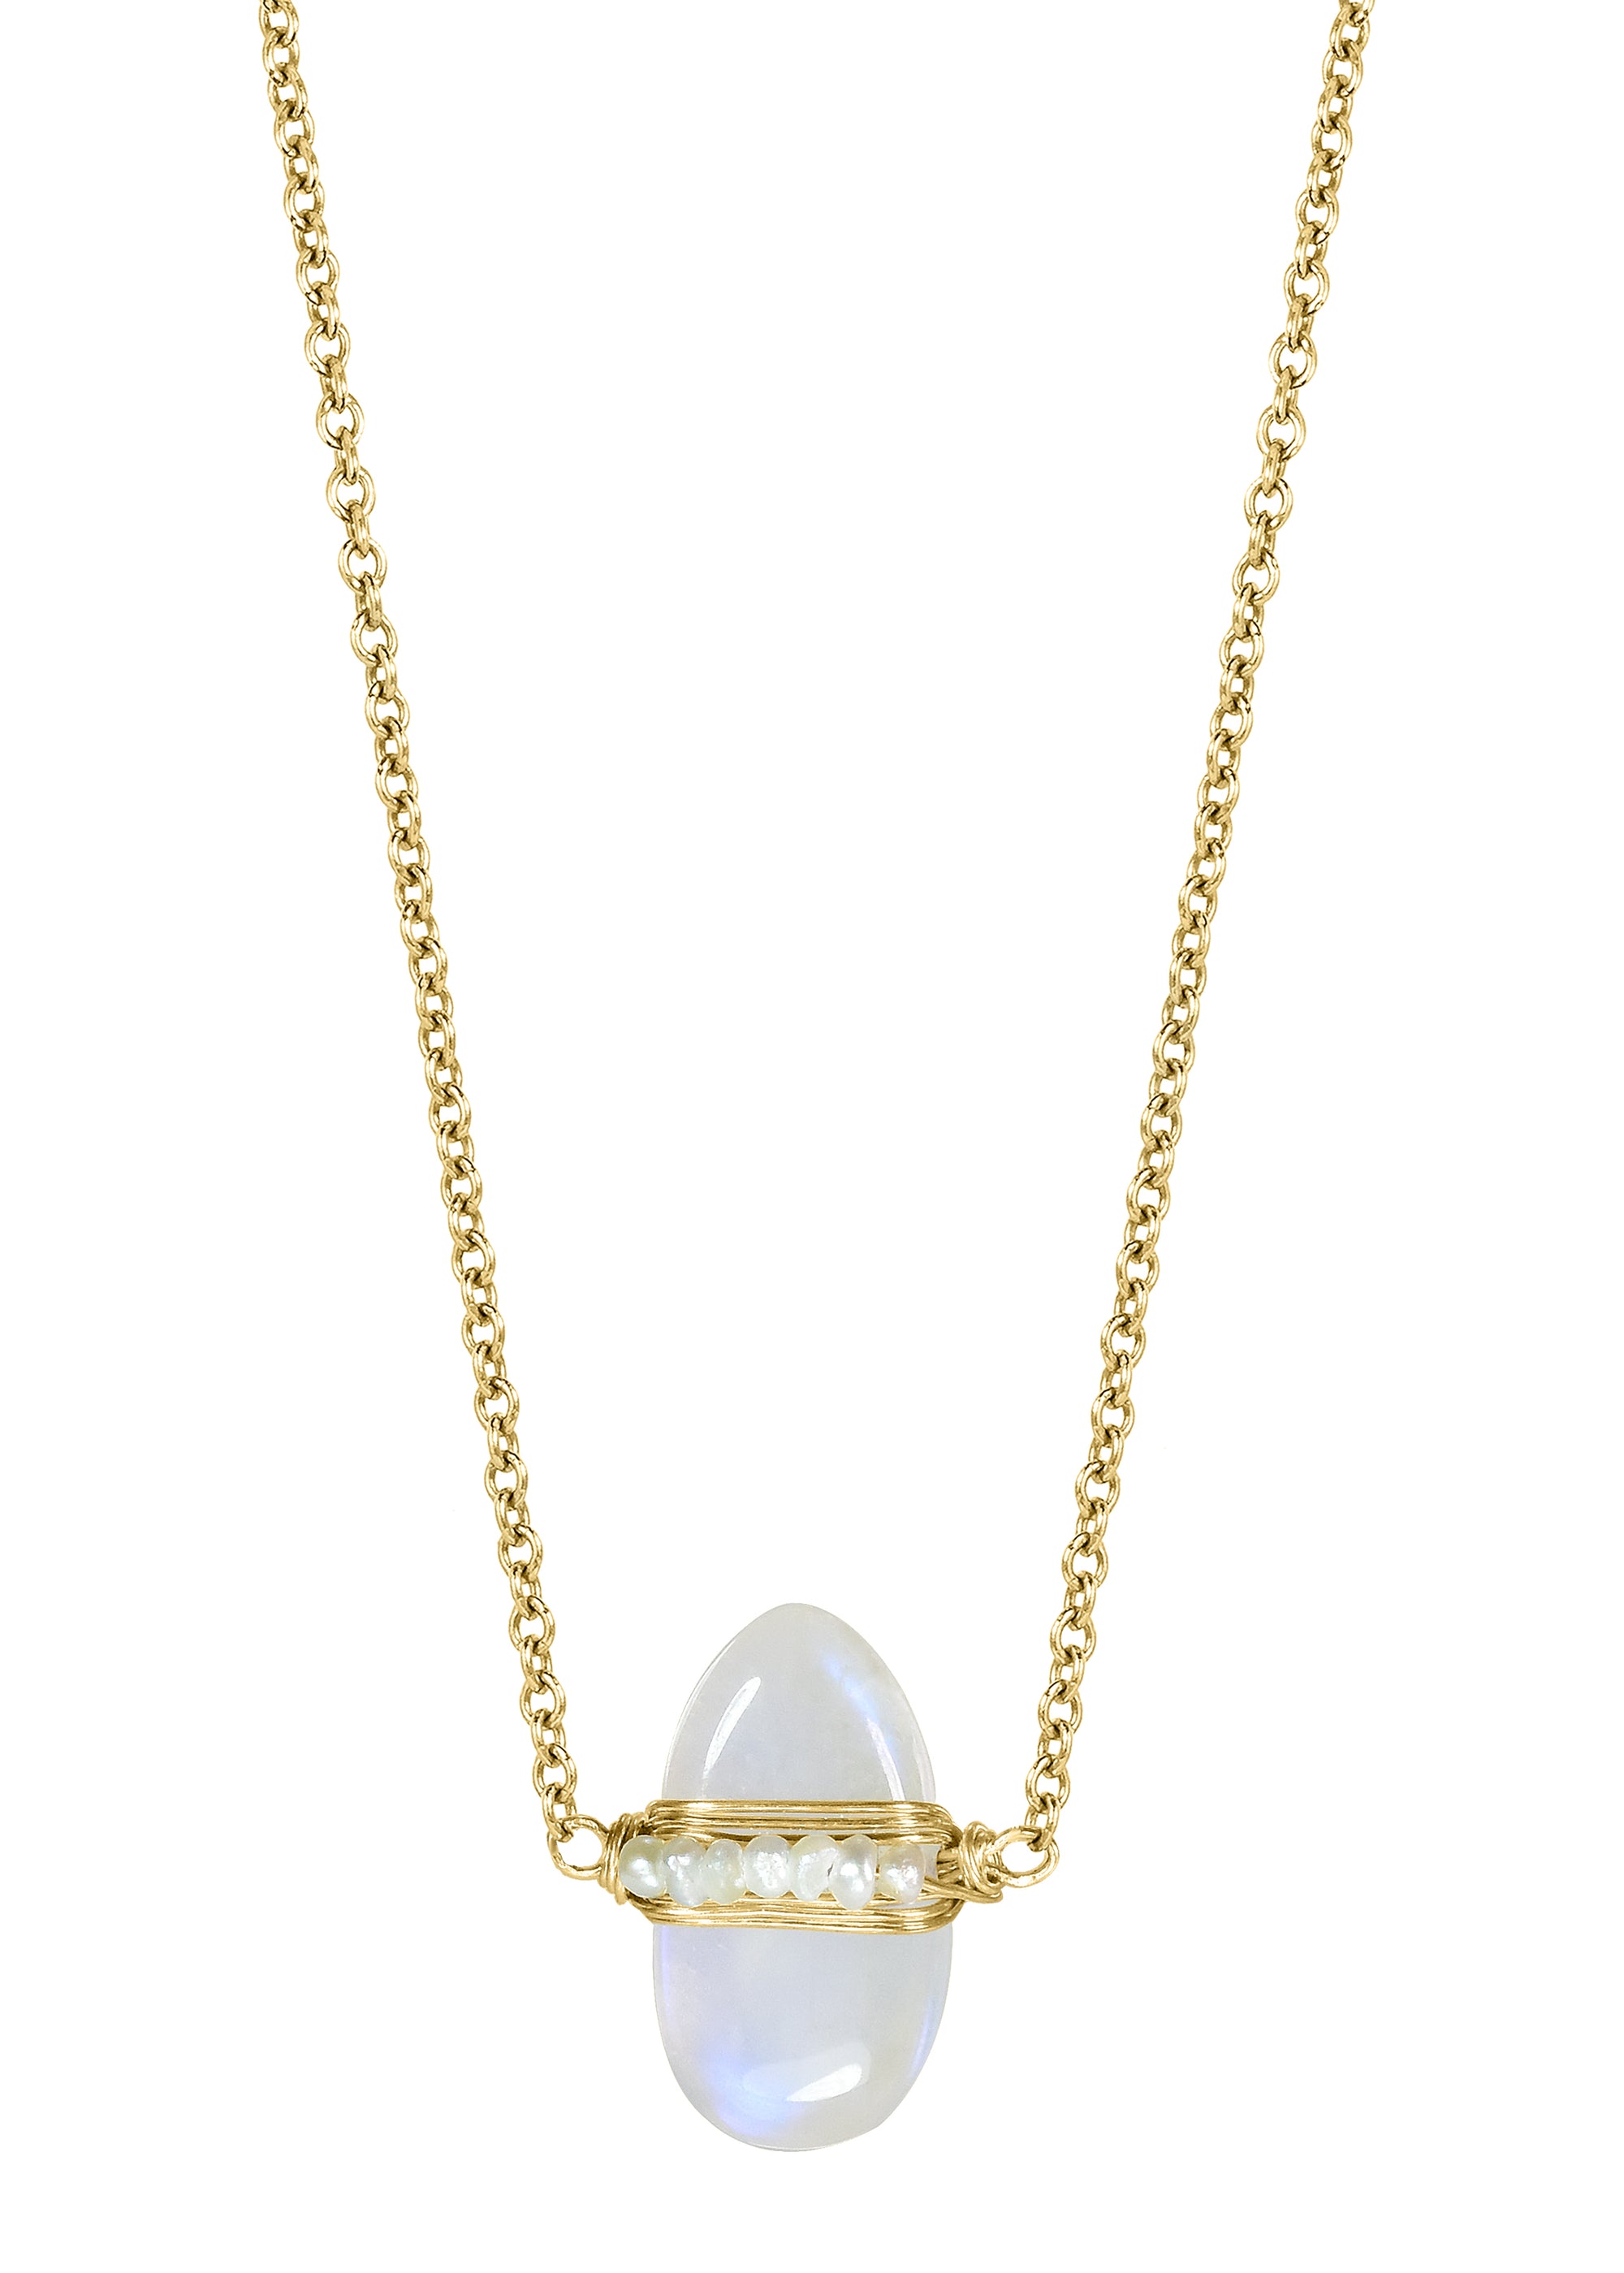 Rainbow moonstone Freshwater pearl 14k gold fill Necklace measures 16-1/4" in length Pendant measures 1/2" in length and 5/16" in width at the widest point Handmade in our Los Angeles studio